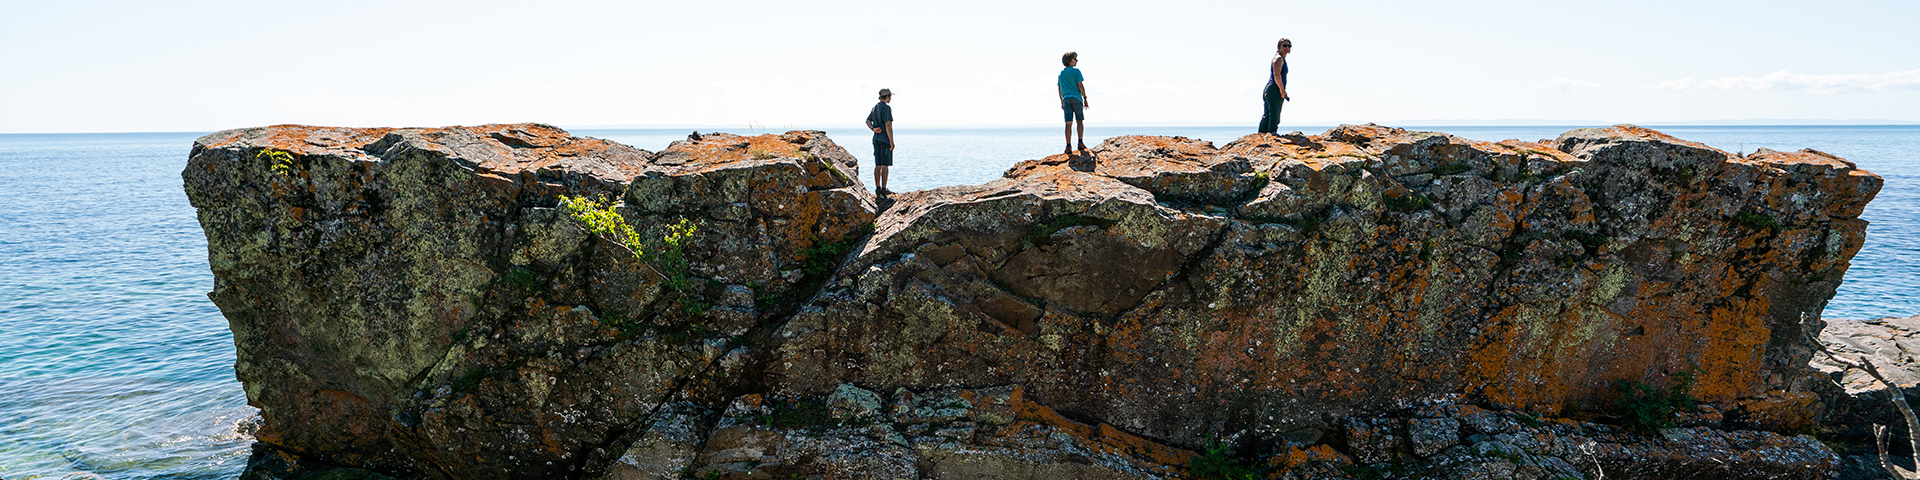 Three people standing on a large rock.